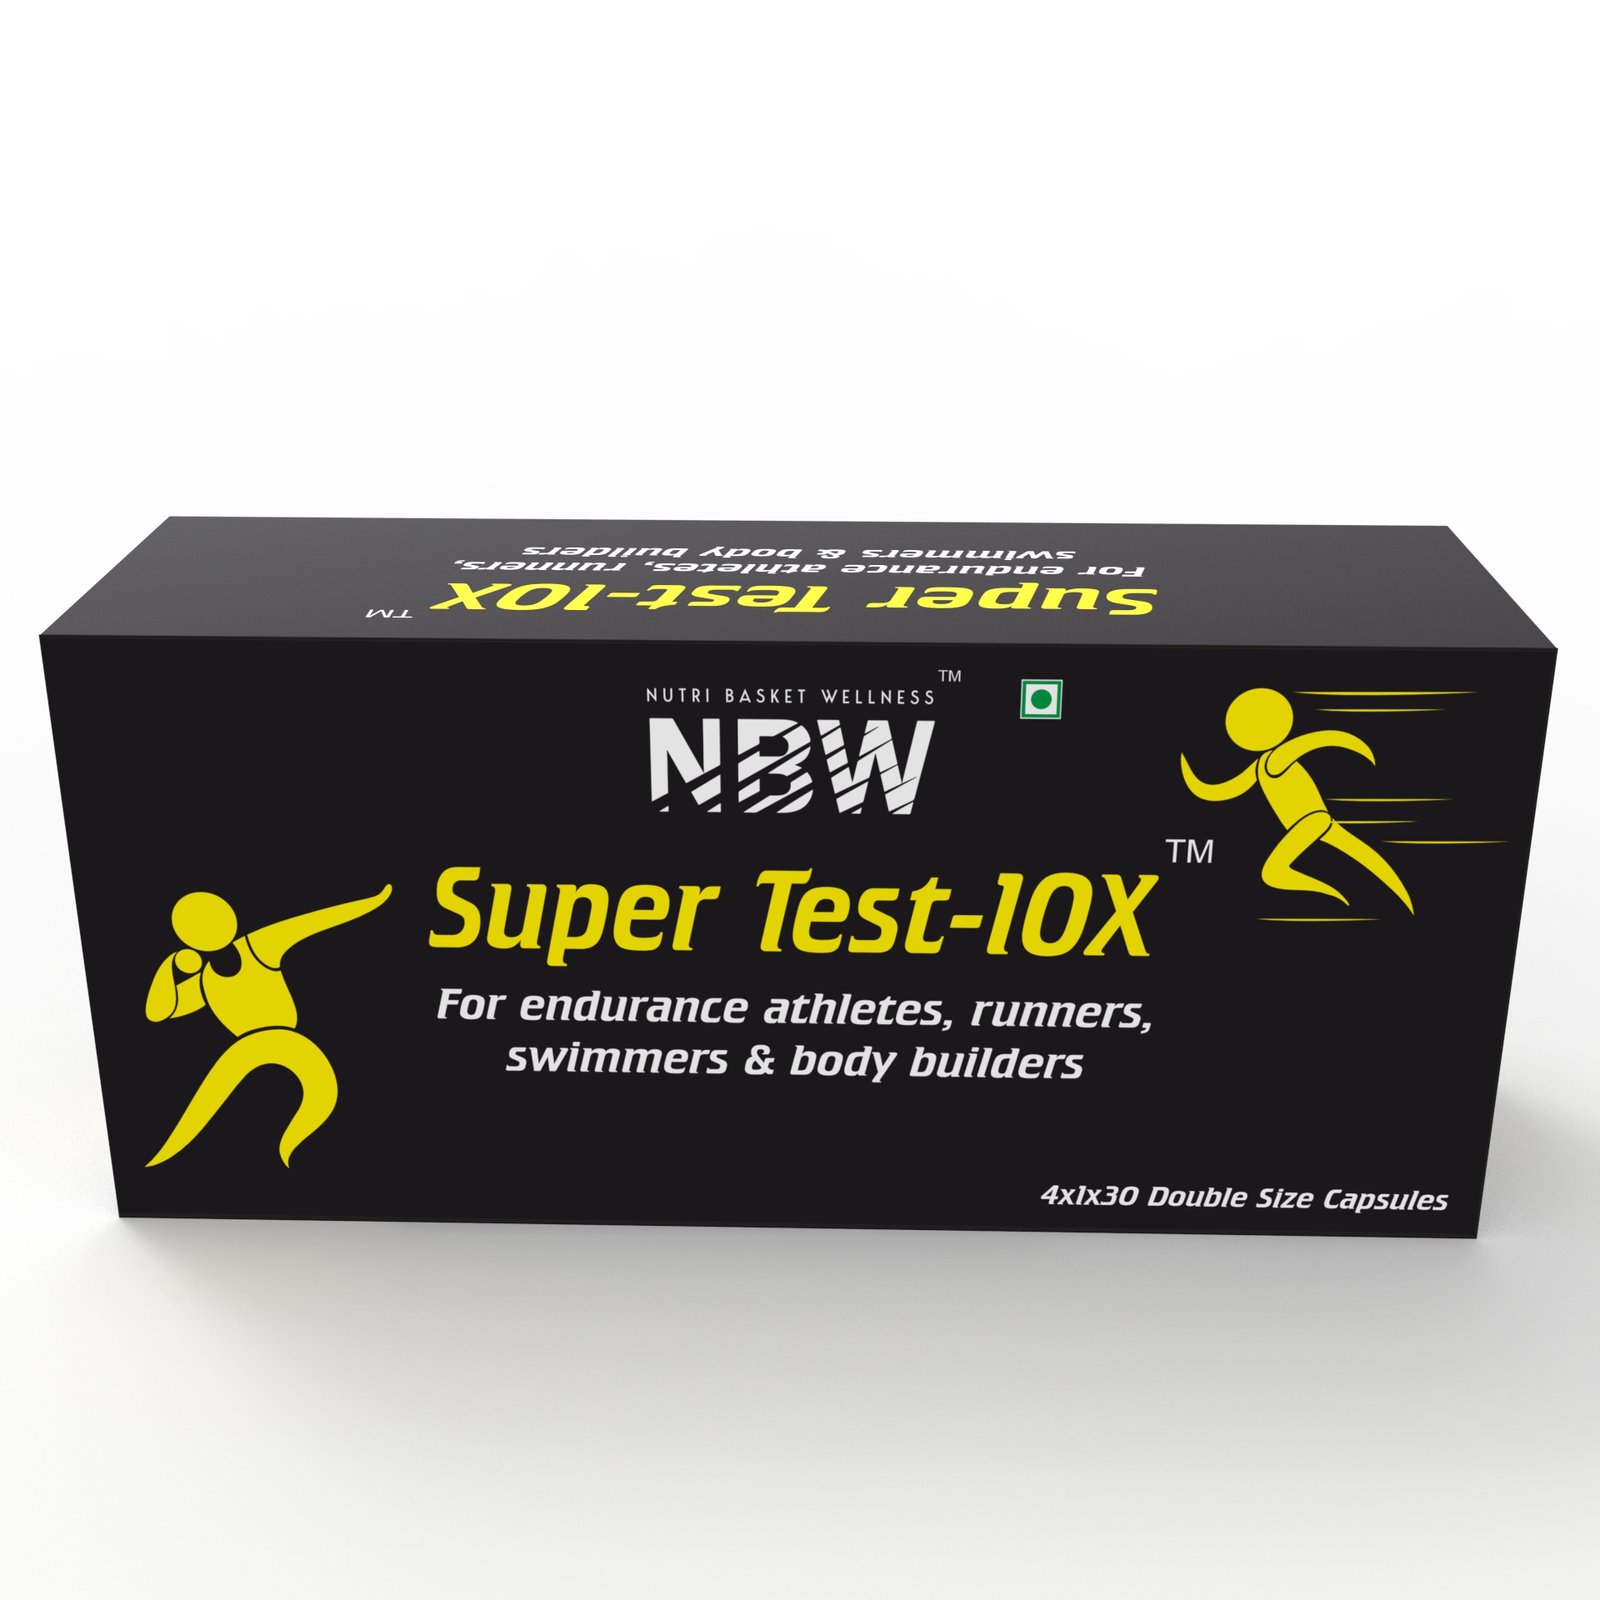 NBW Super Test-10X | Special Testosterone Boosting Formula For Sports Persons, Runners, Swimmers & Other Endurance Athletes